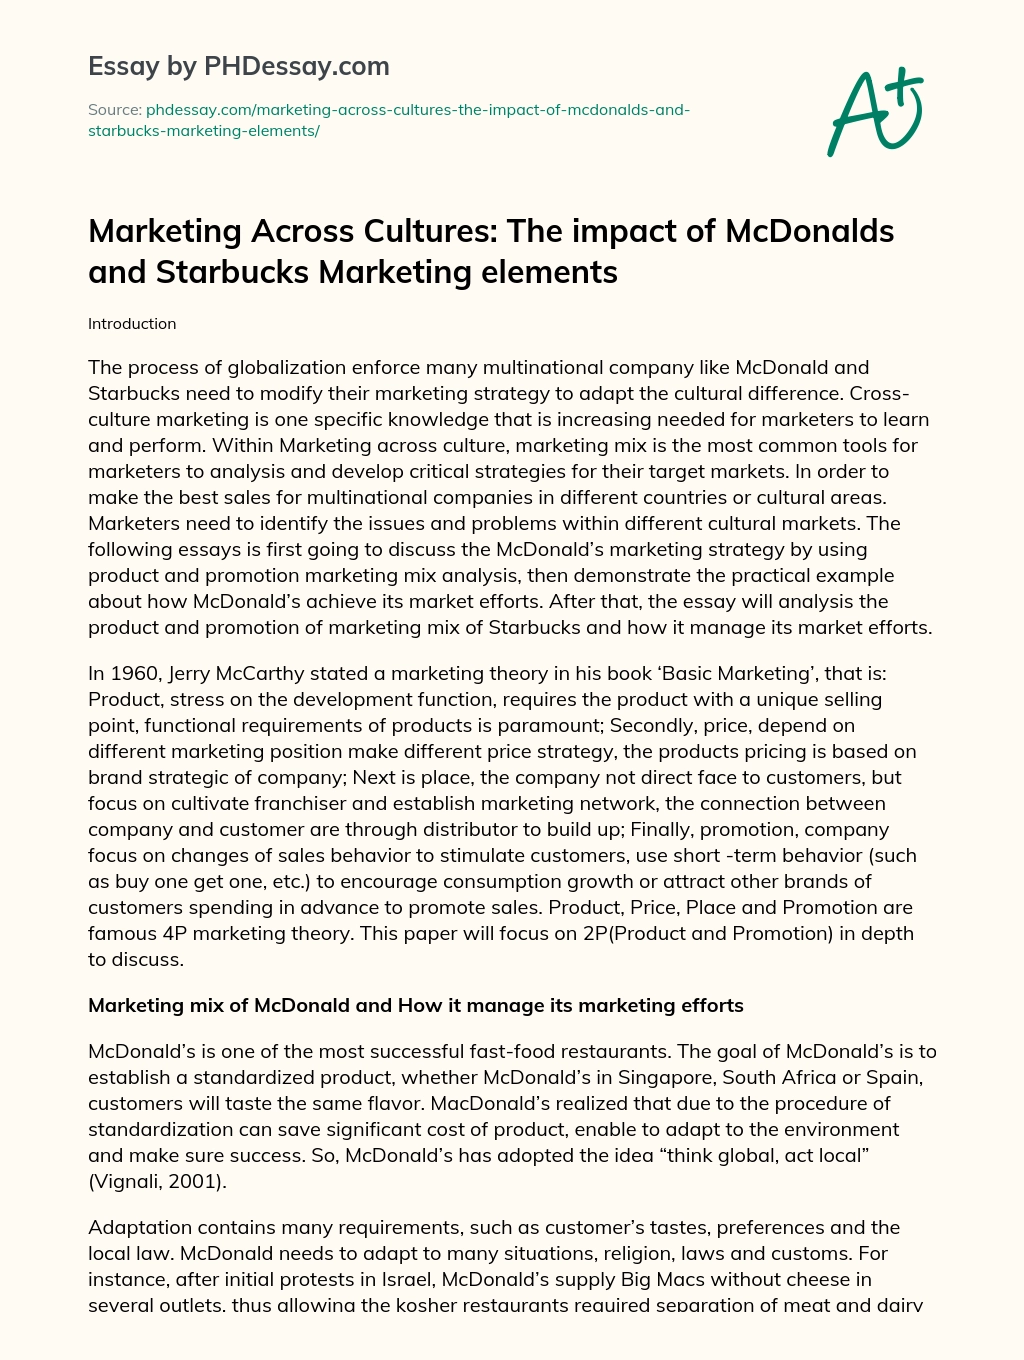 Marketing Across Cultures: The impact of McDonalds and Starbucks Marketing elements essay